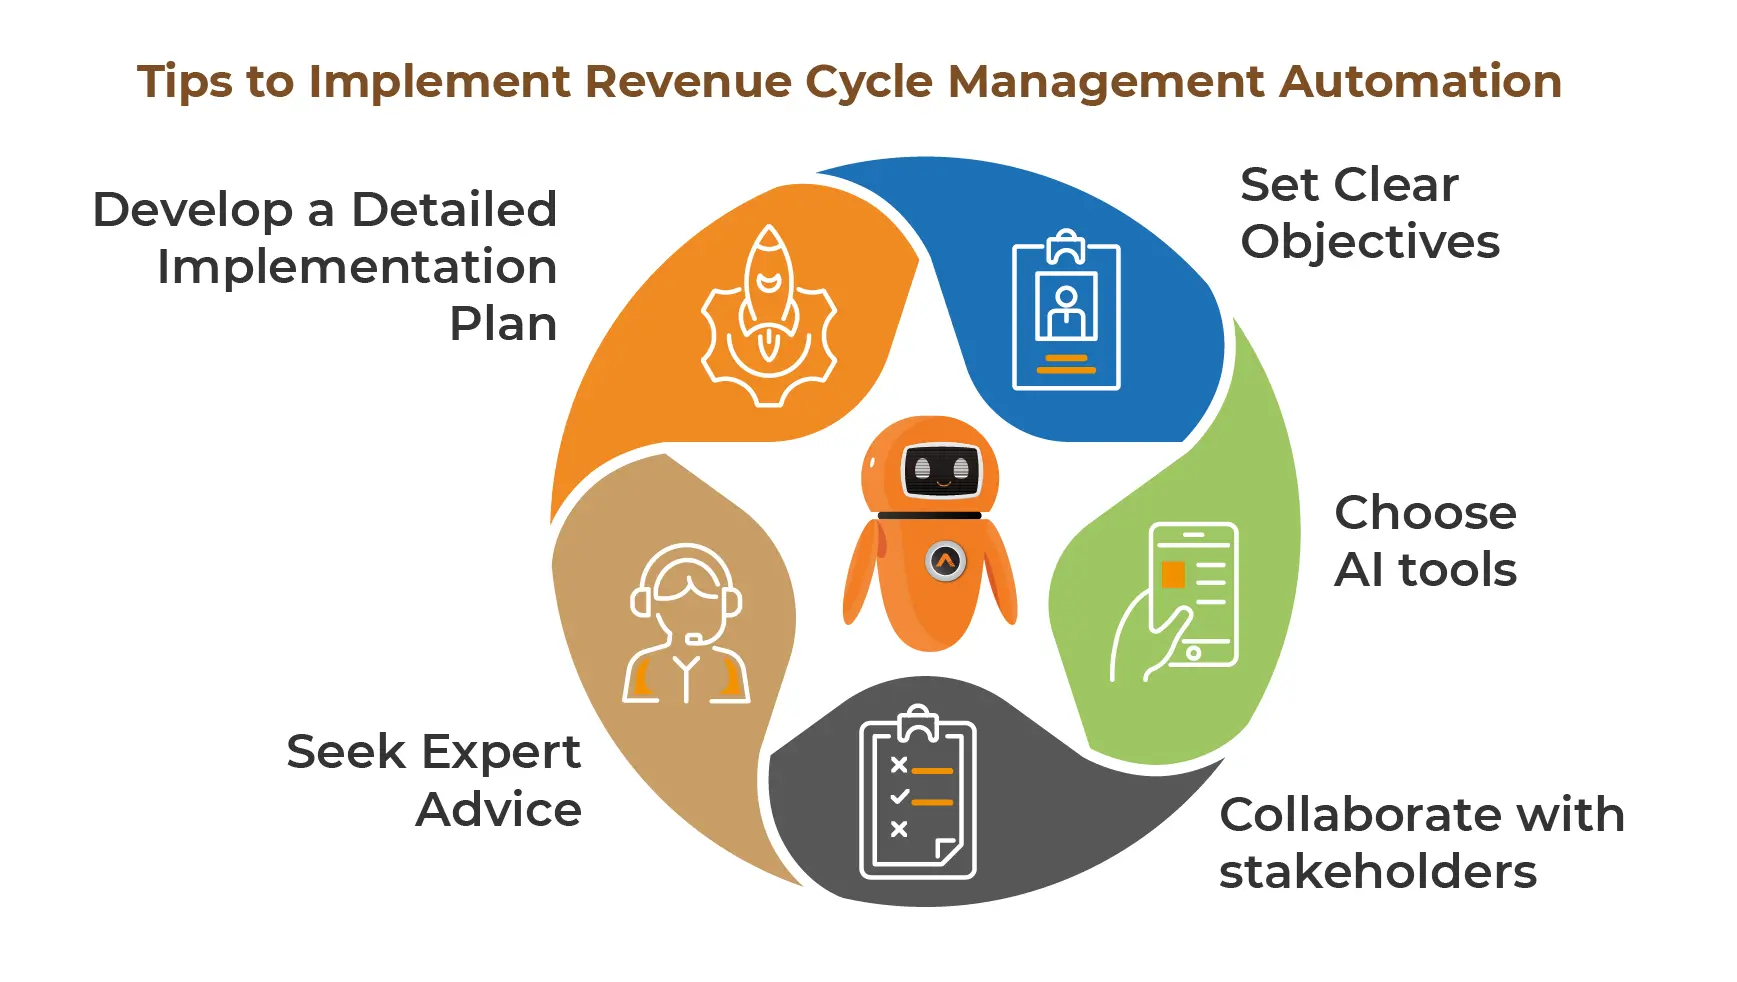 Tips to Implement Revenue Cycle Management Automation